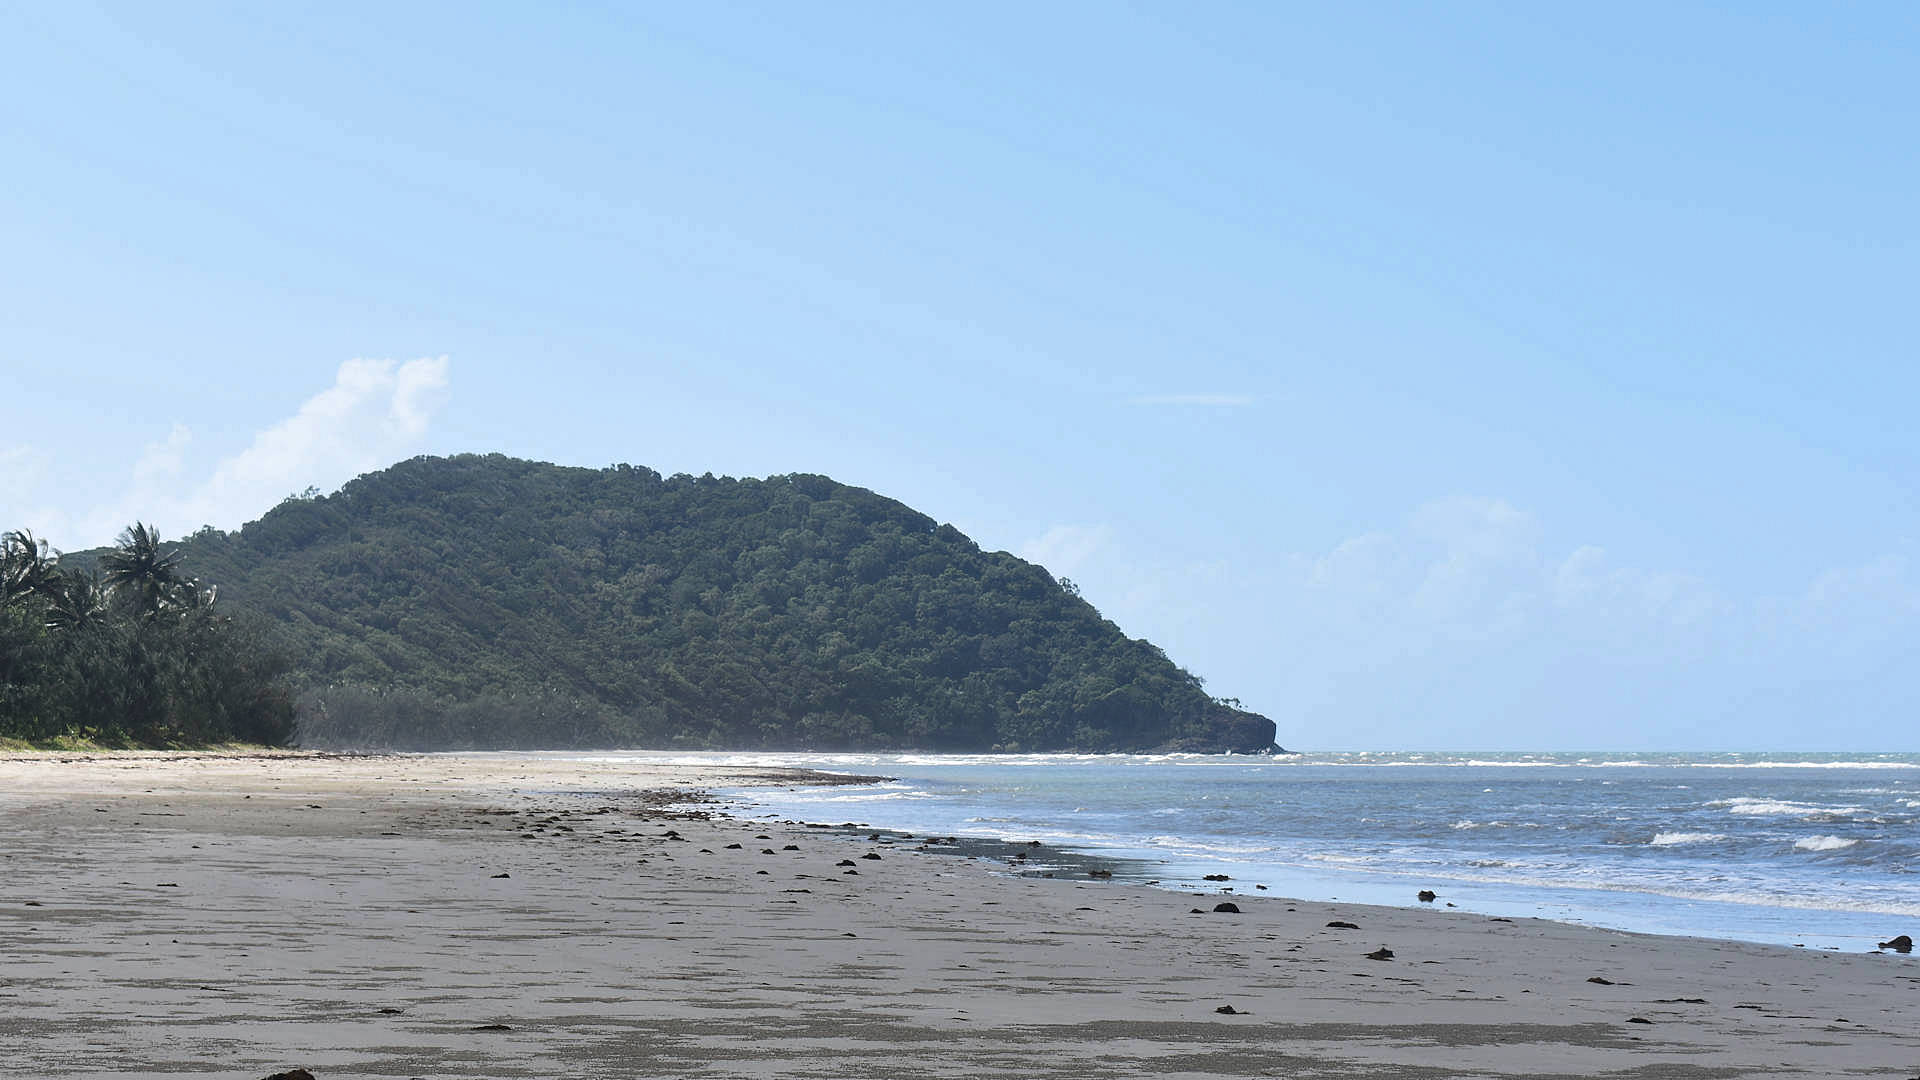 Sandy beach at low tide with blue skies, headlands of Cape Tribulation in the distance, taken at Myall Beach